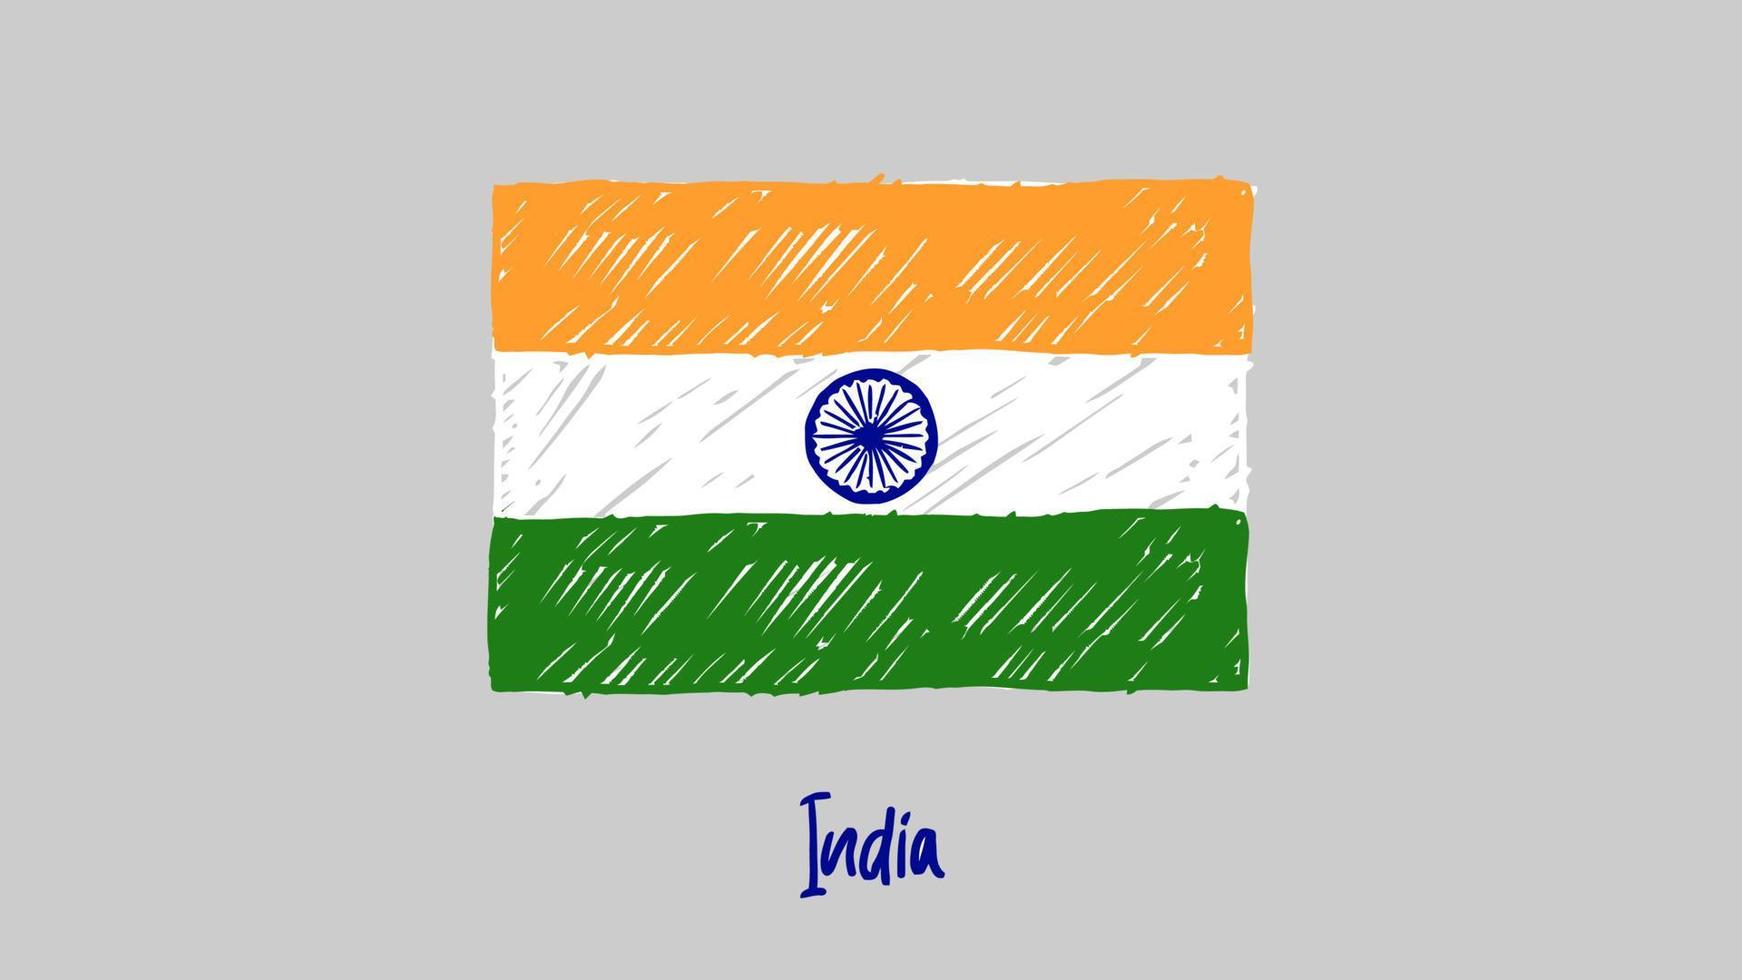 India National Country Flag Marker or Pencil Sketch Illustration Vector